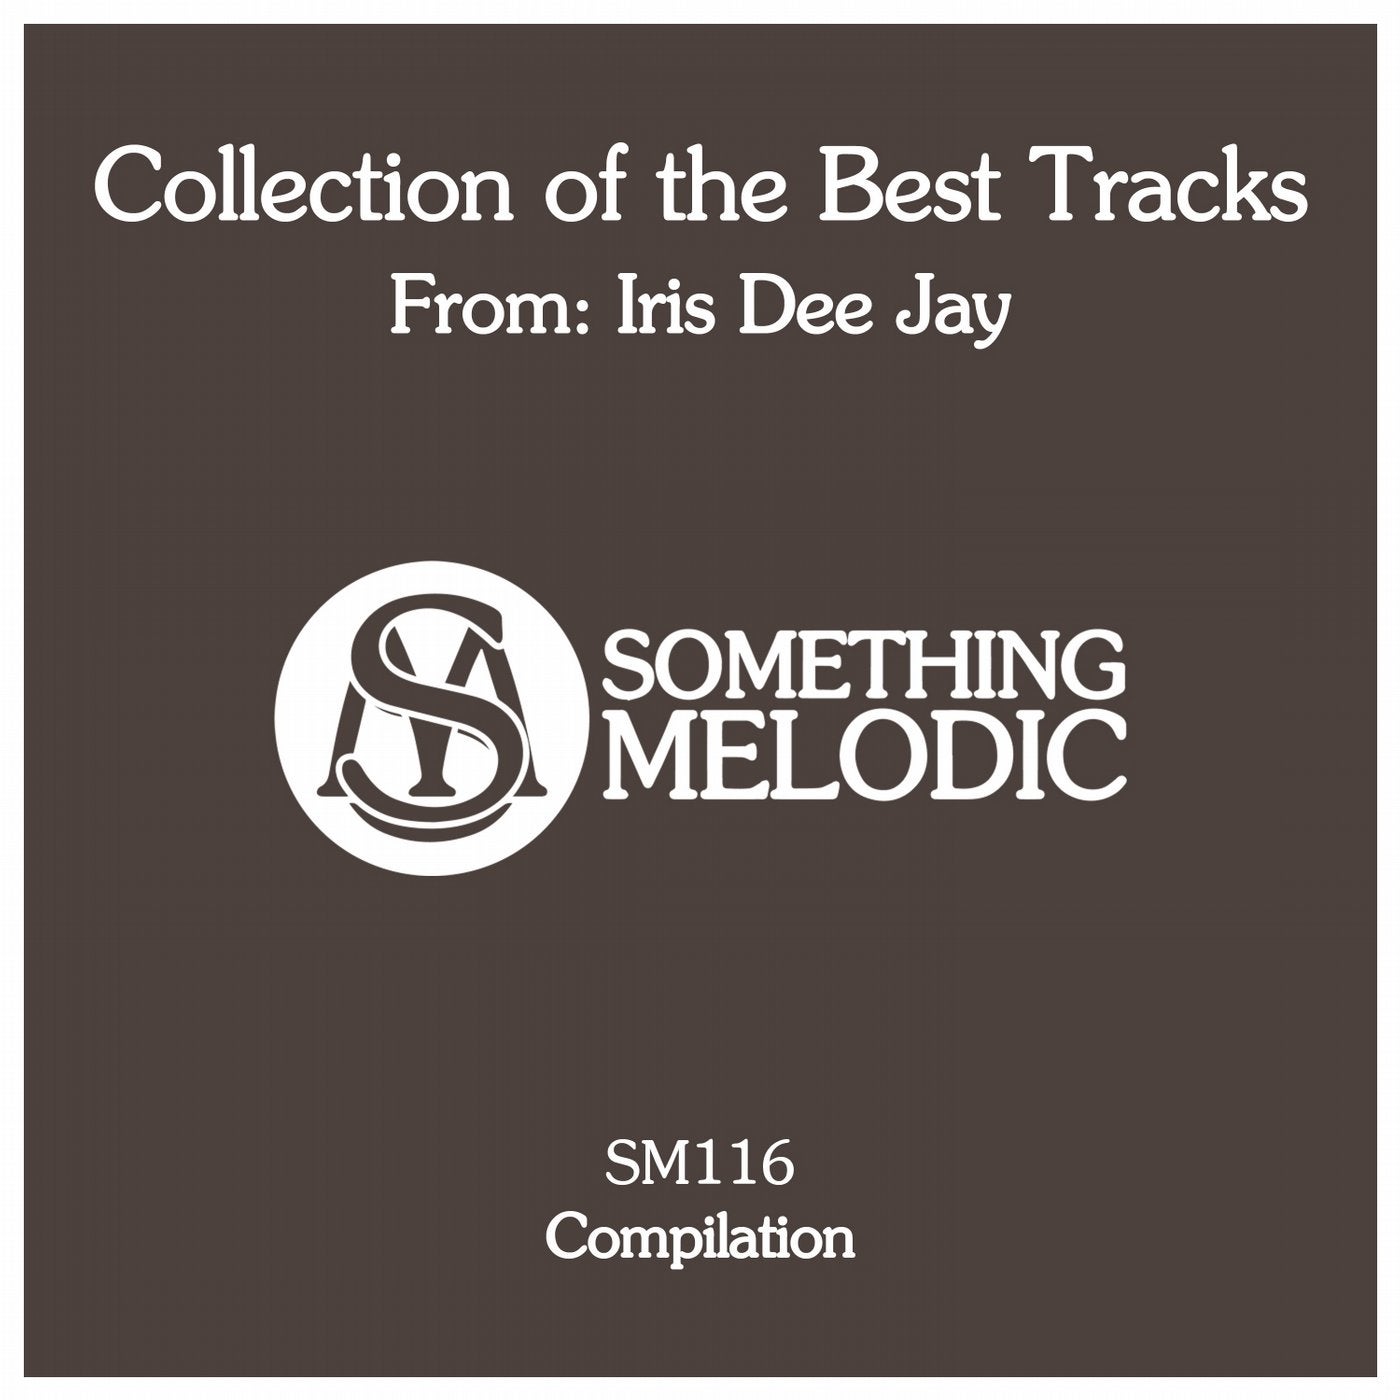 Collection of the Best Tracks From: Iris Dee Jay